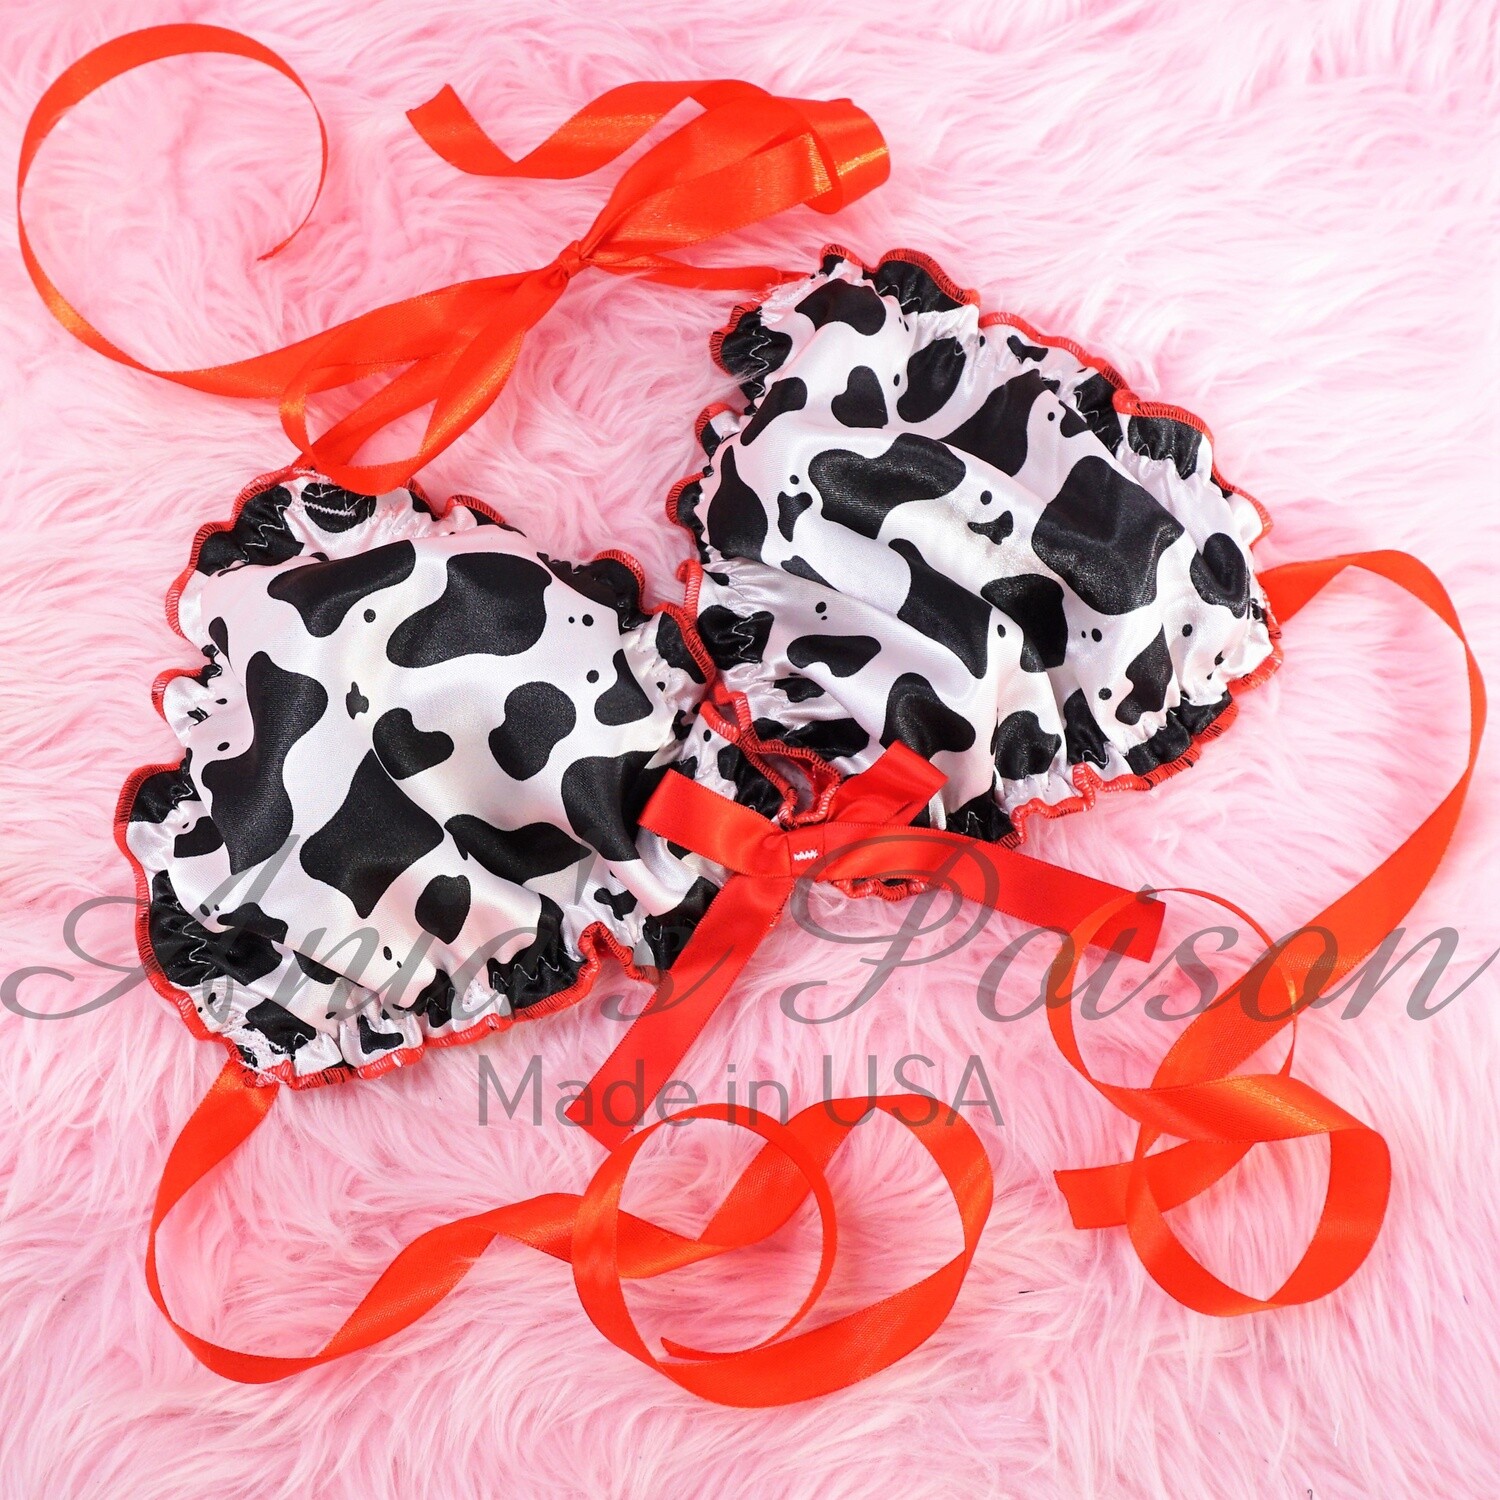 Satin Bra with cow print and red trim - Ruffled super shiny lined tie up halter triangle Unisex OS bra